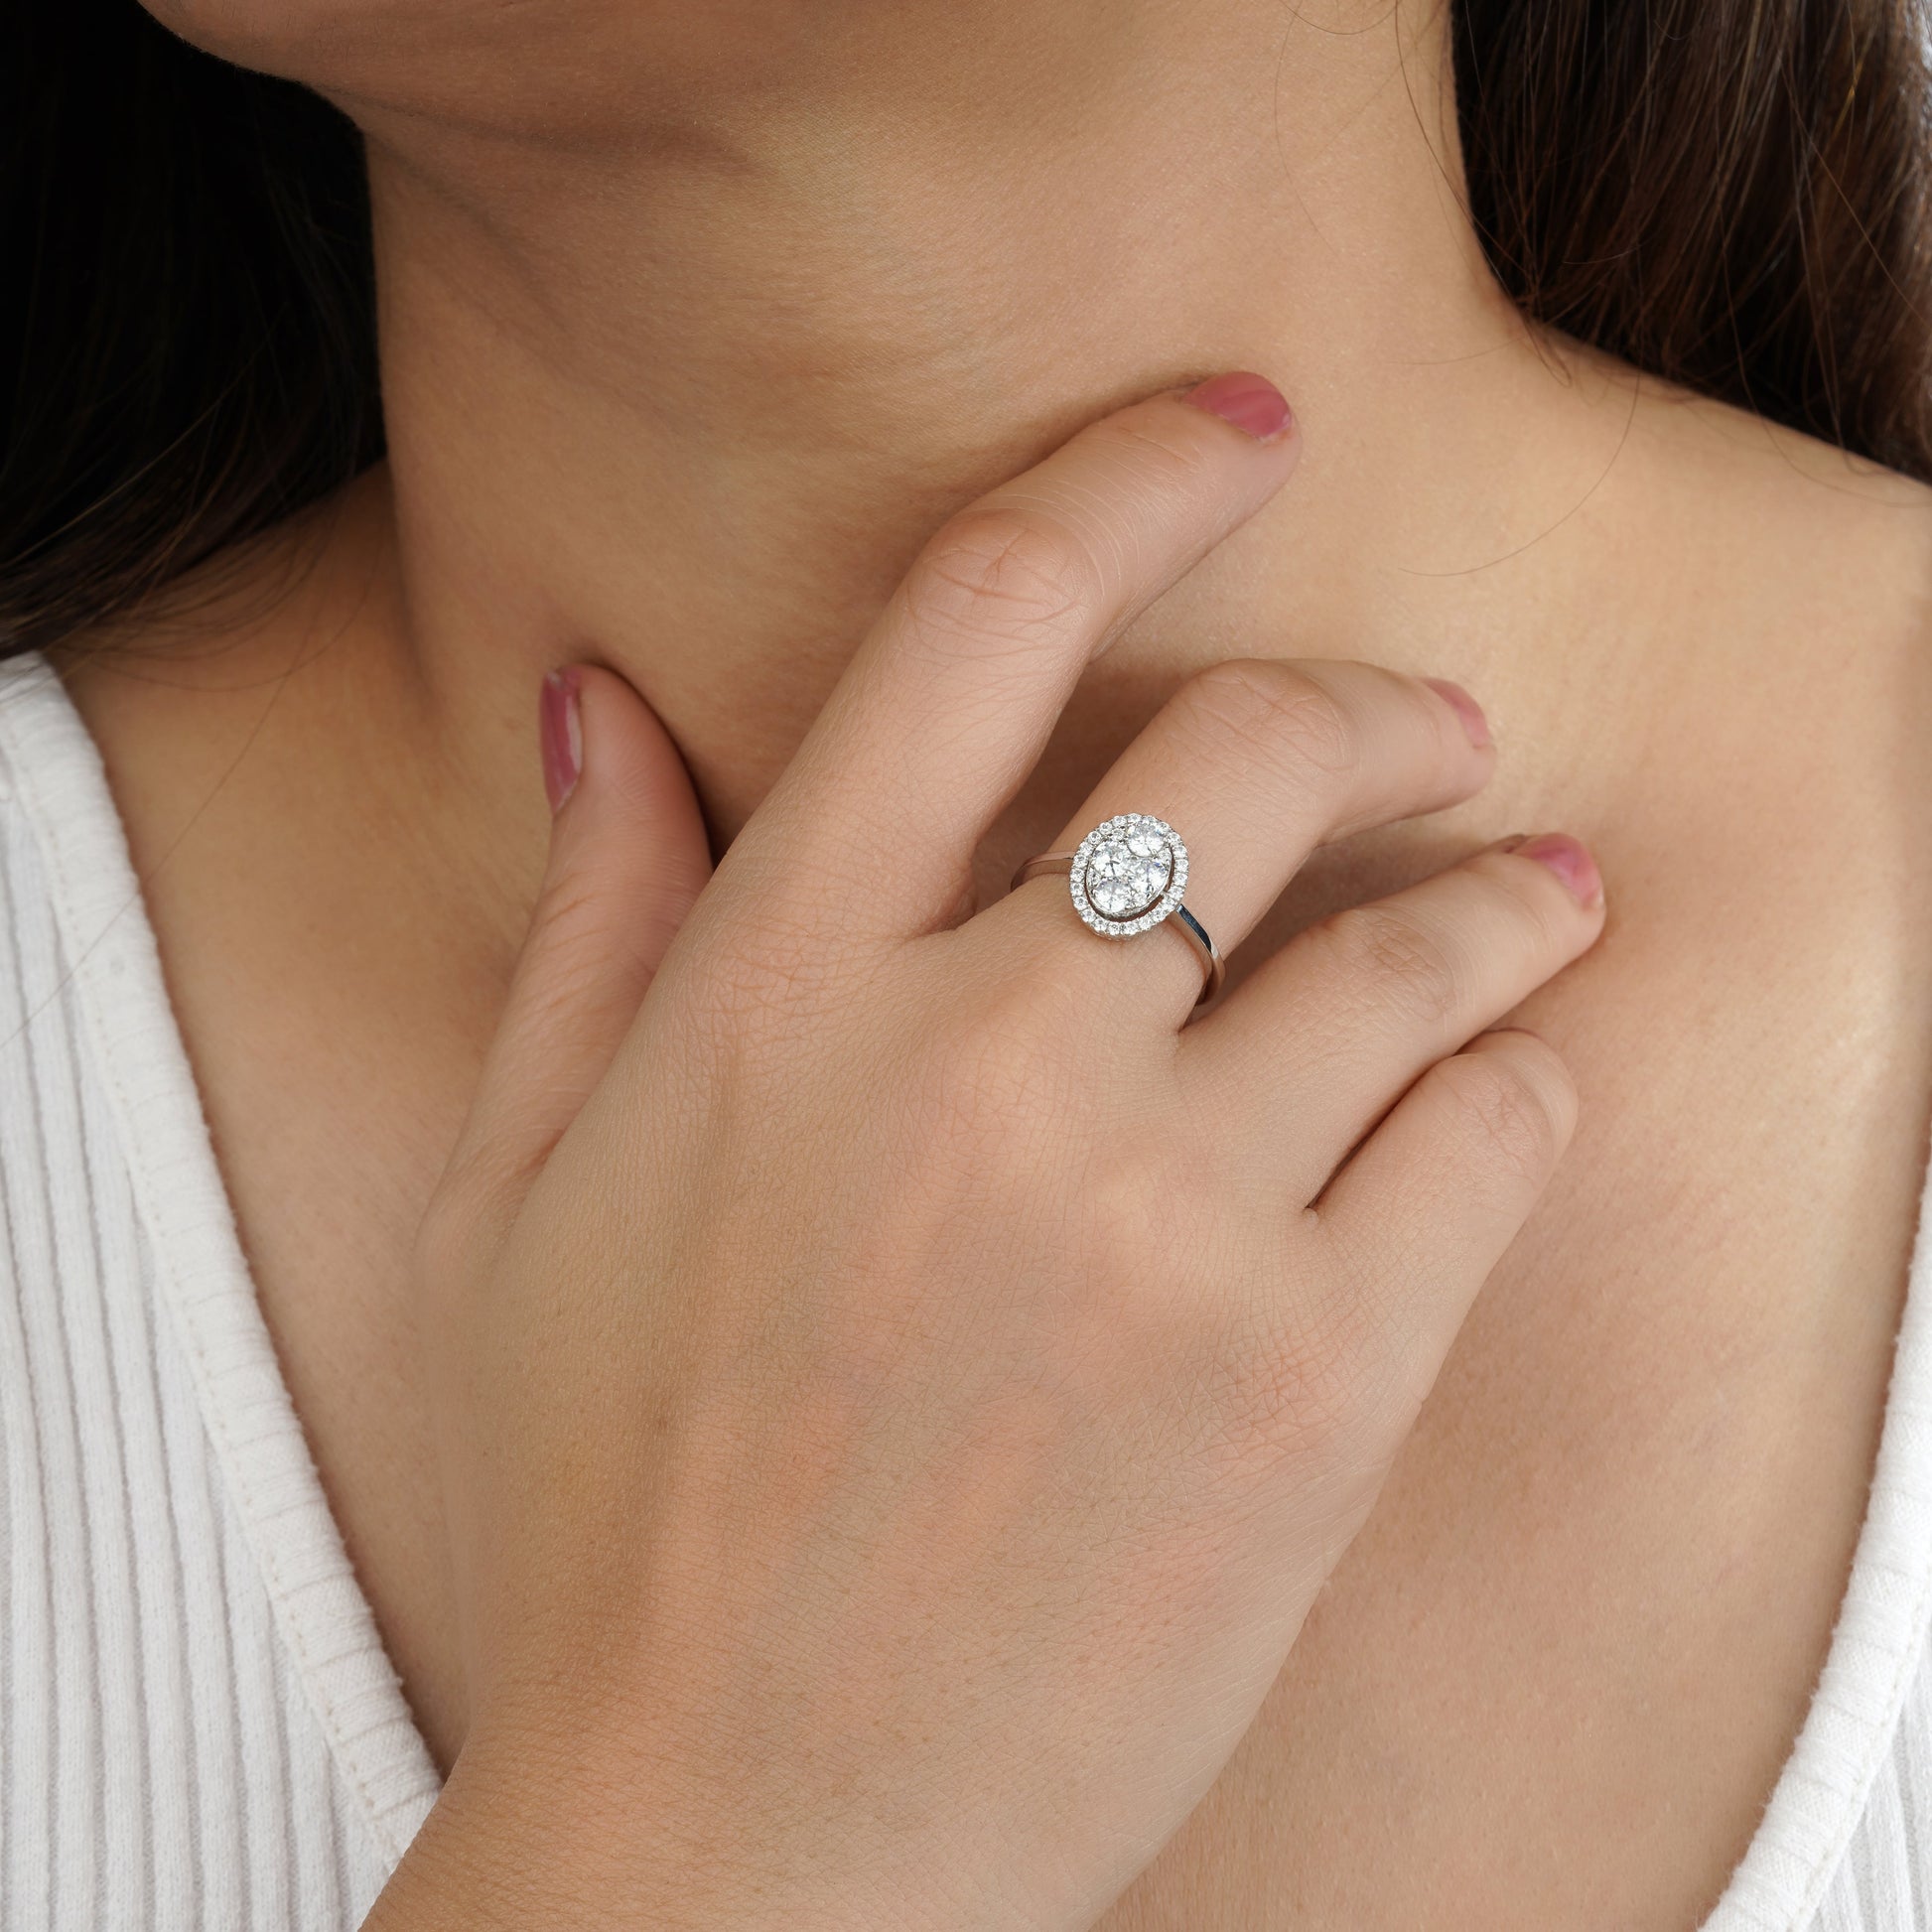 a person holding a diamond ring